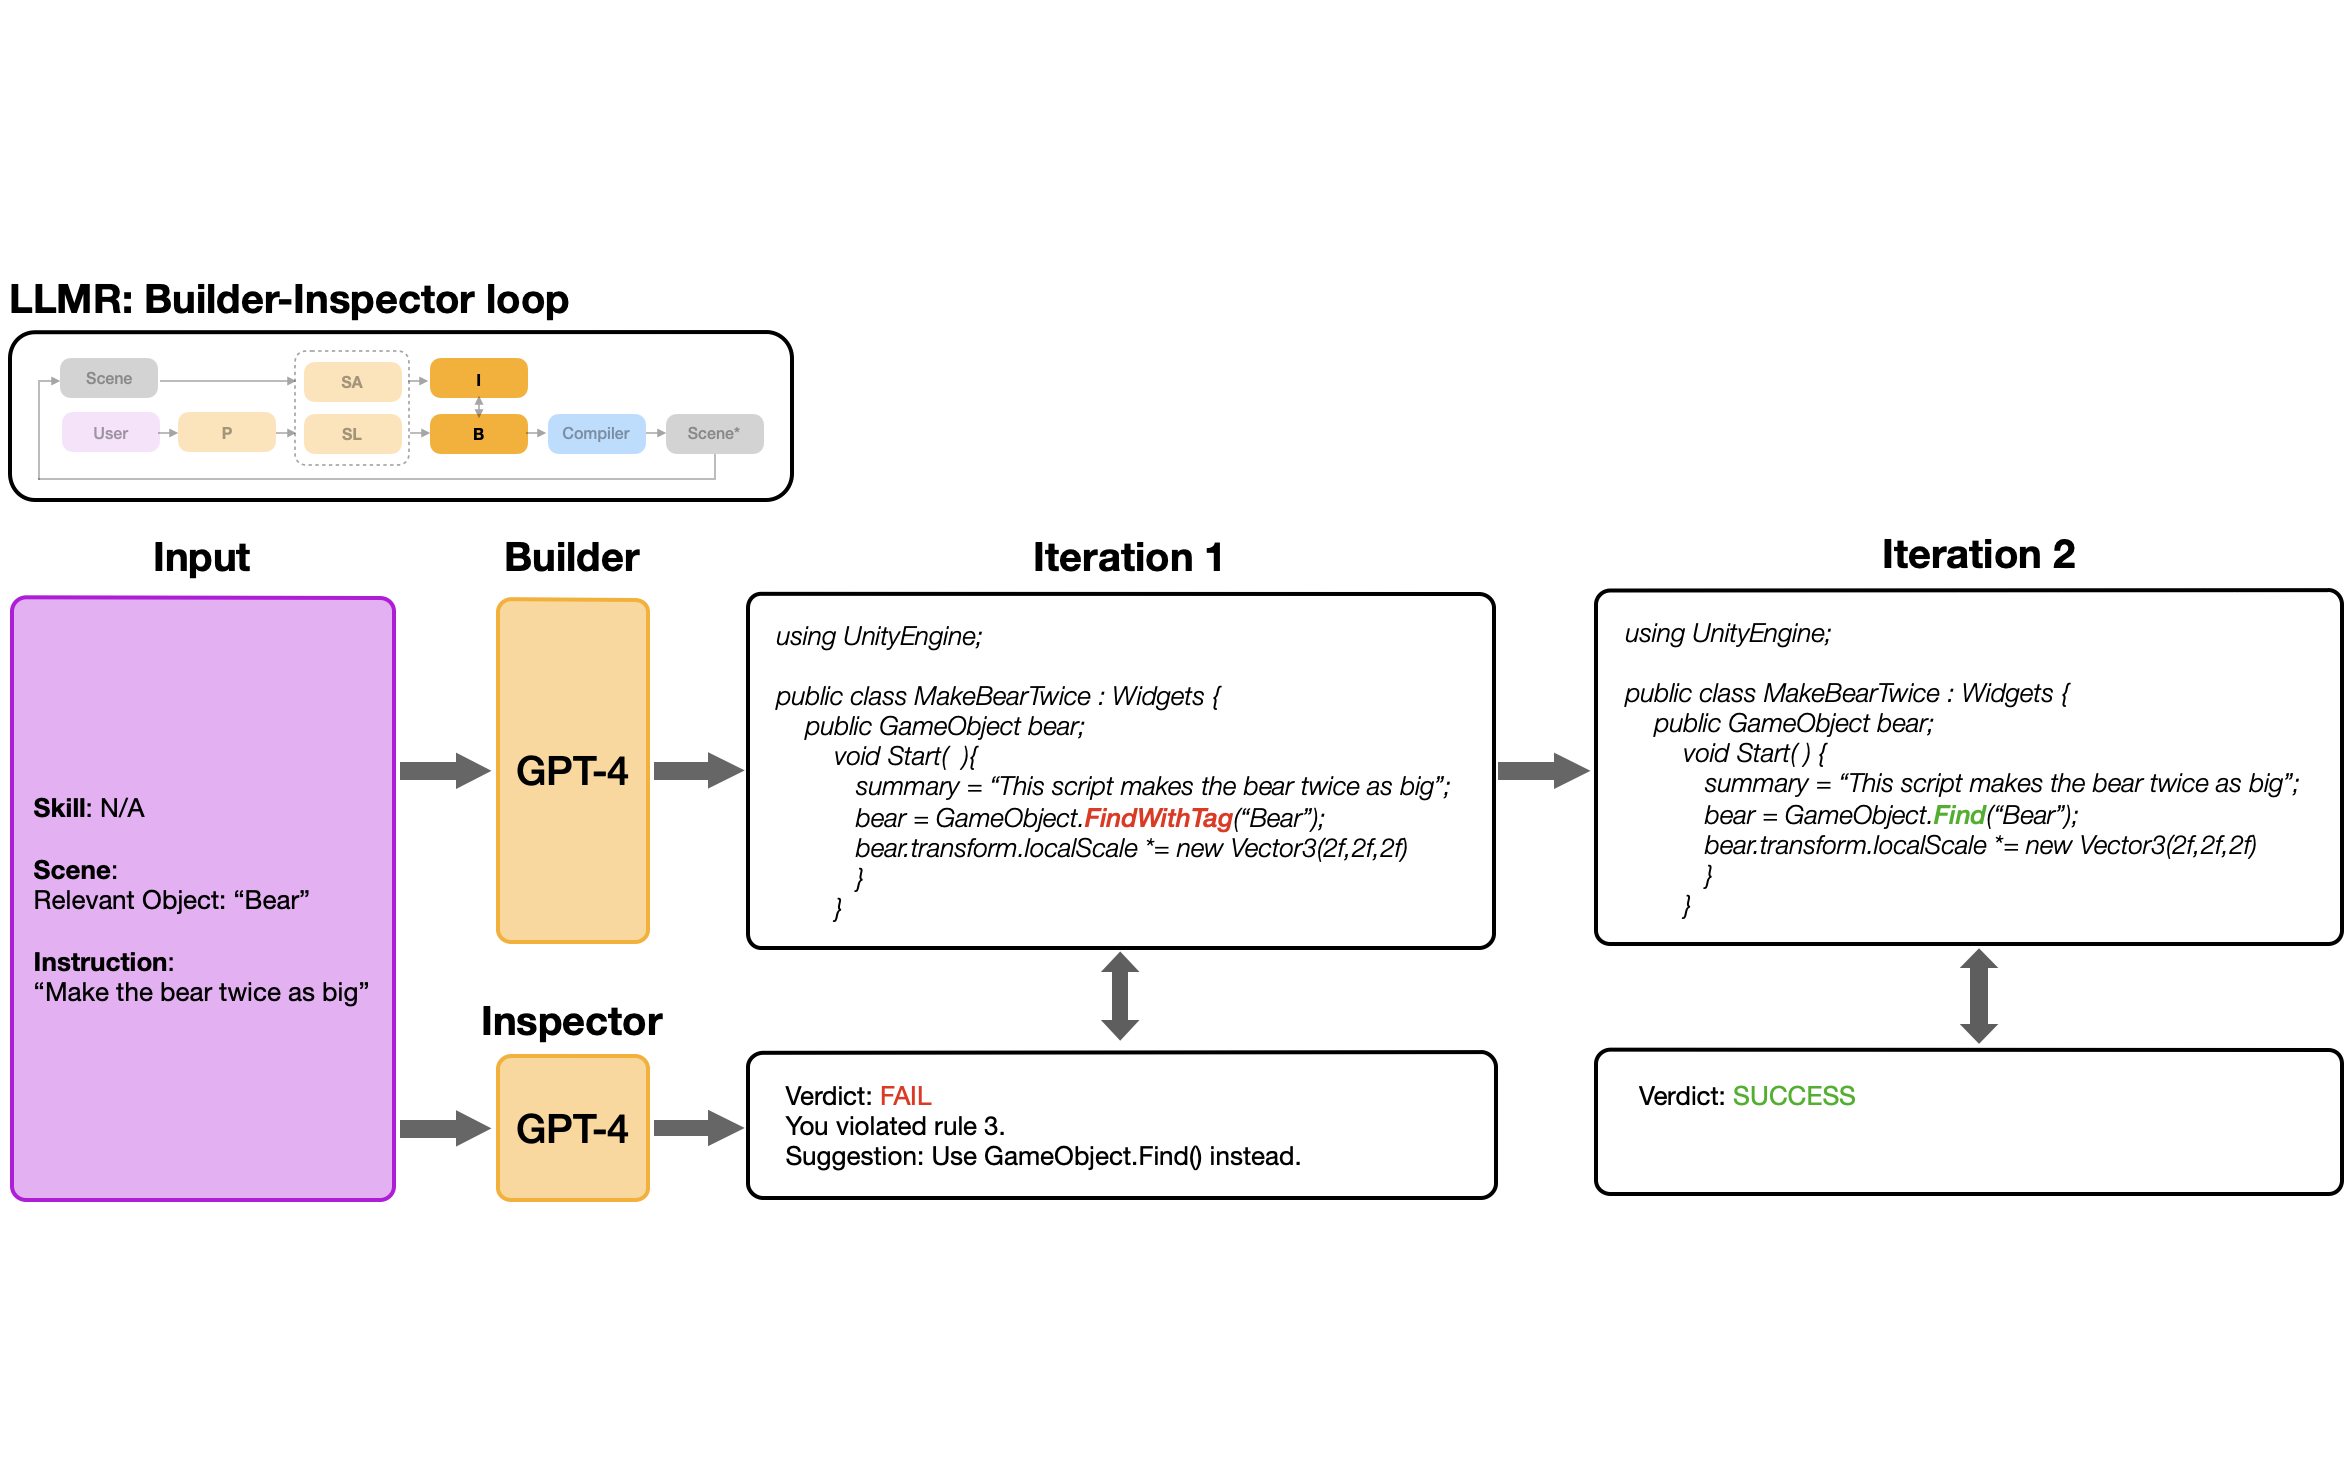 This figure illustrates the Builder-Inspector loop in LLMR, where the Builder module generates code based on user input and current state, and the Inspector module checks for errors and provides suggestions for corrections. The figure shows two iterations. 